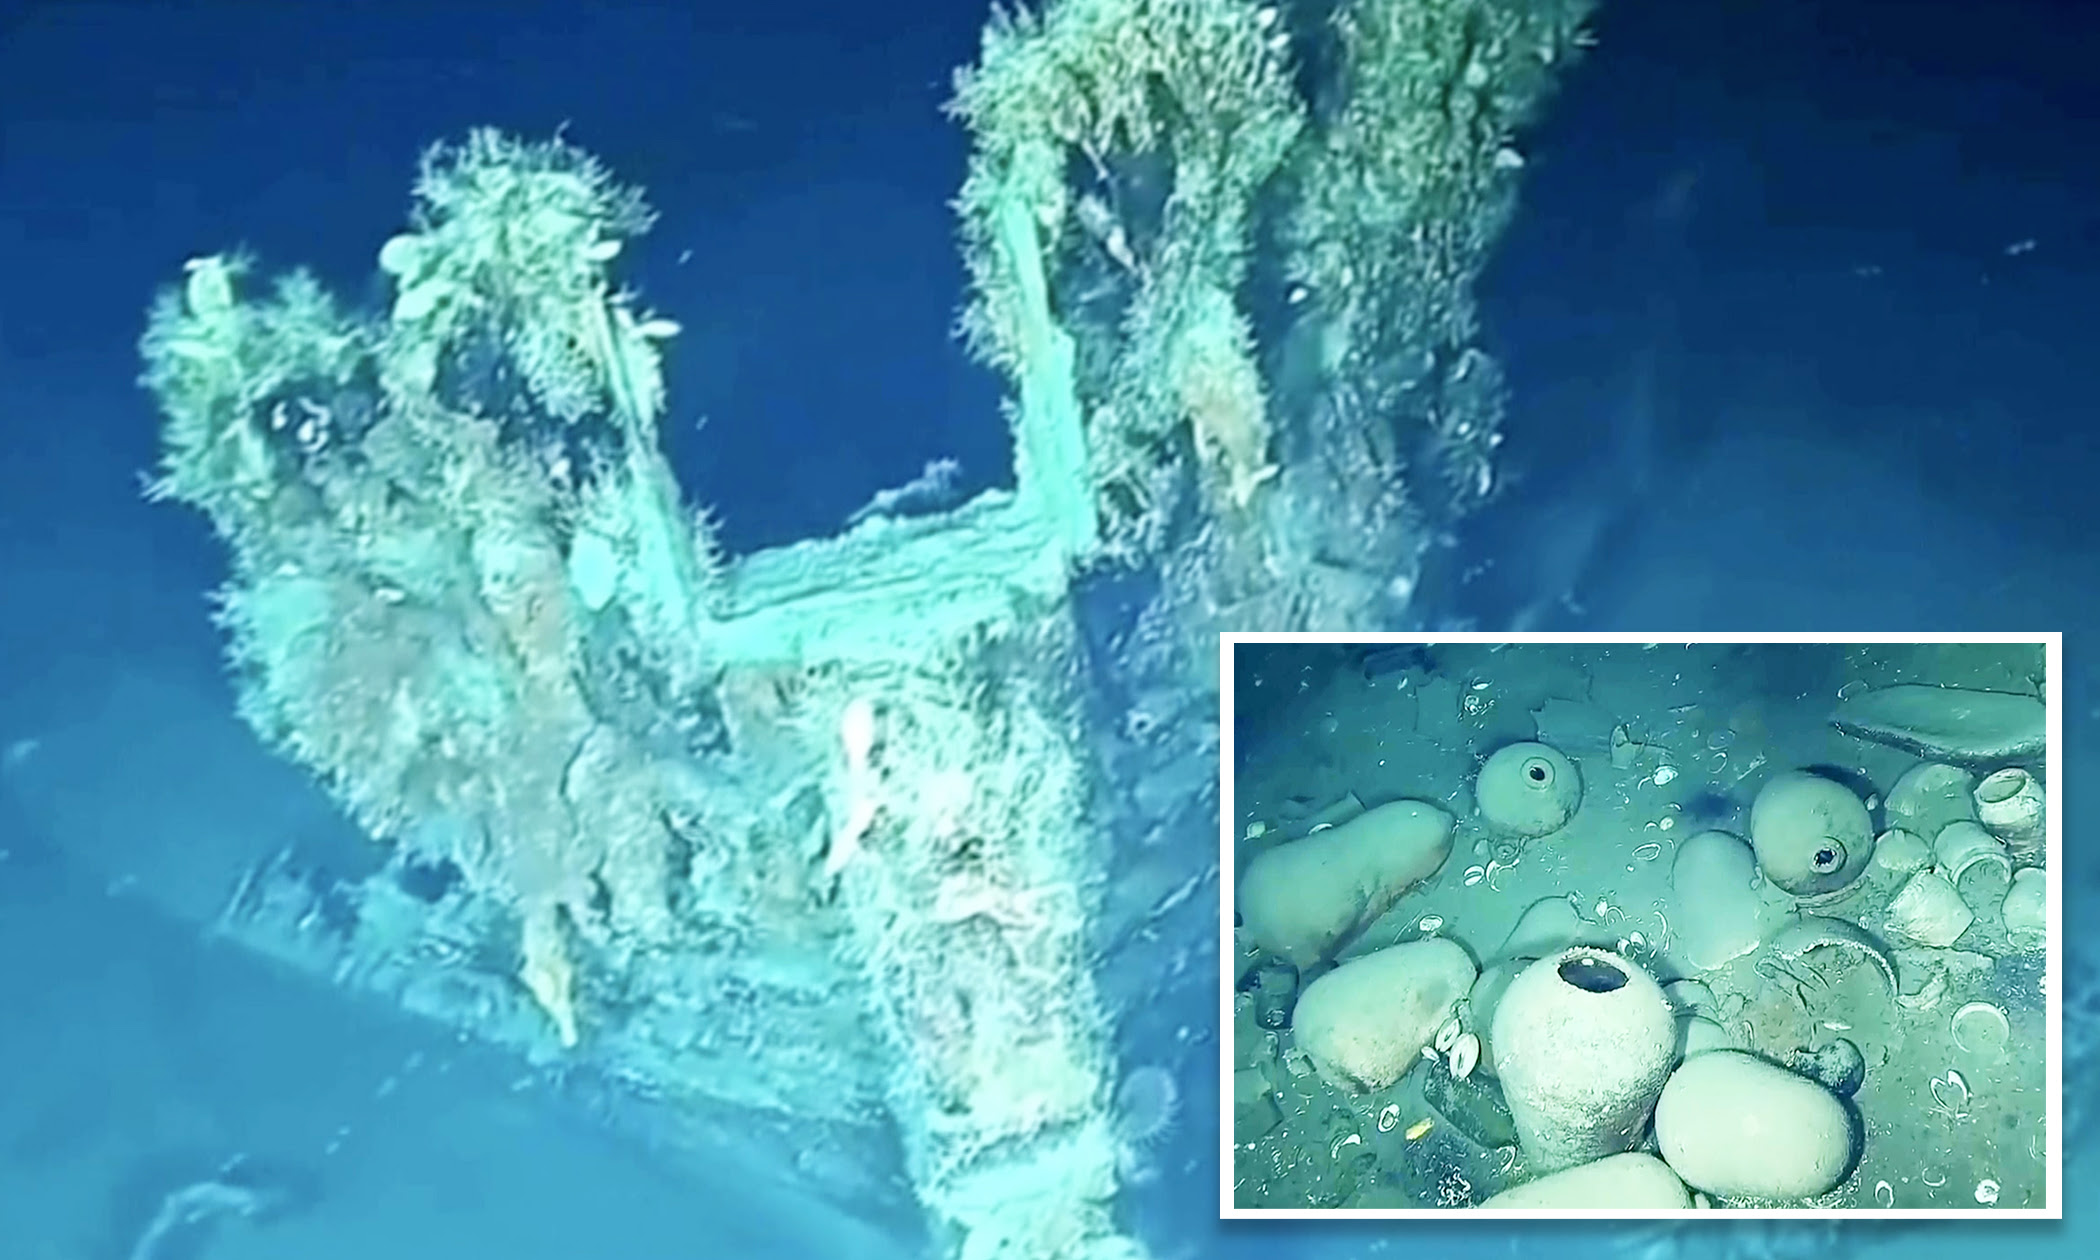 Ocean Vehicle Finds 200-Year-Old Shipwrecks, Gold Coins, Cannons 900m Under Caribbean; Could Be Worth Billions